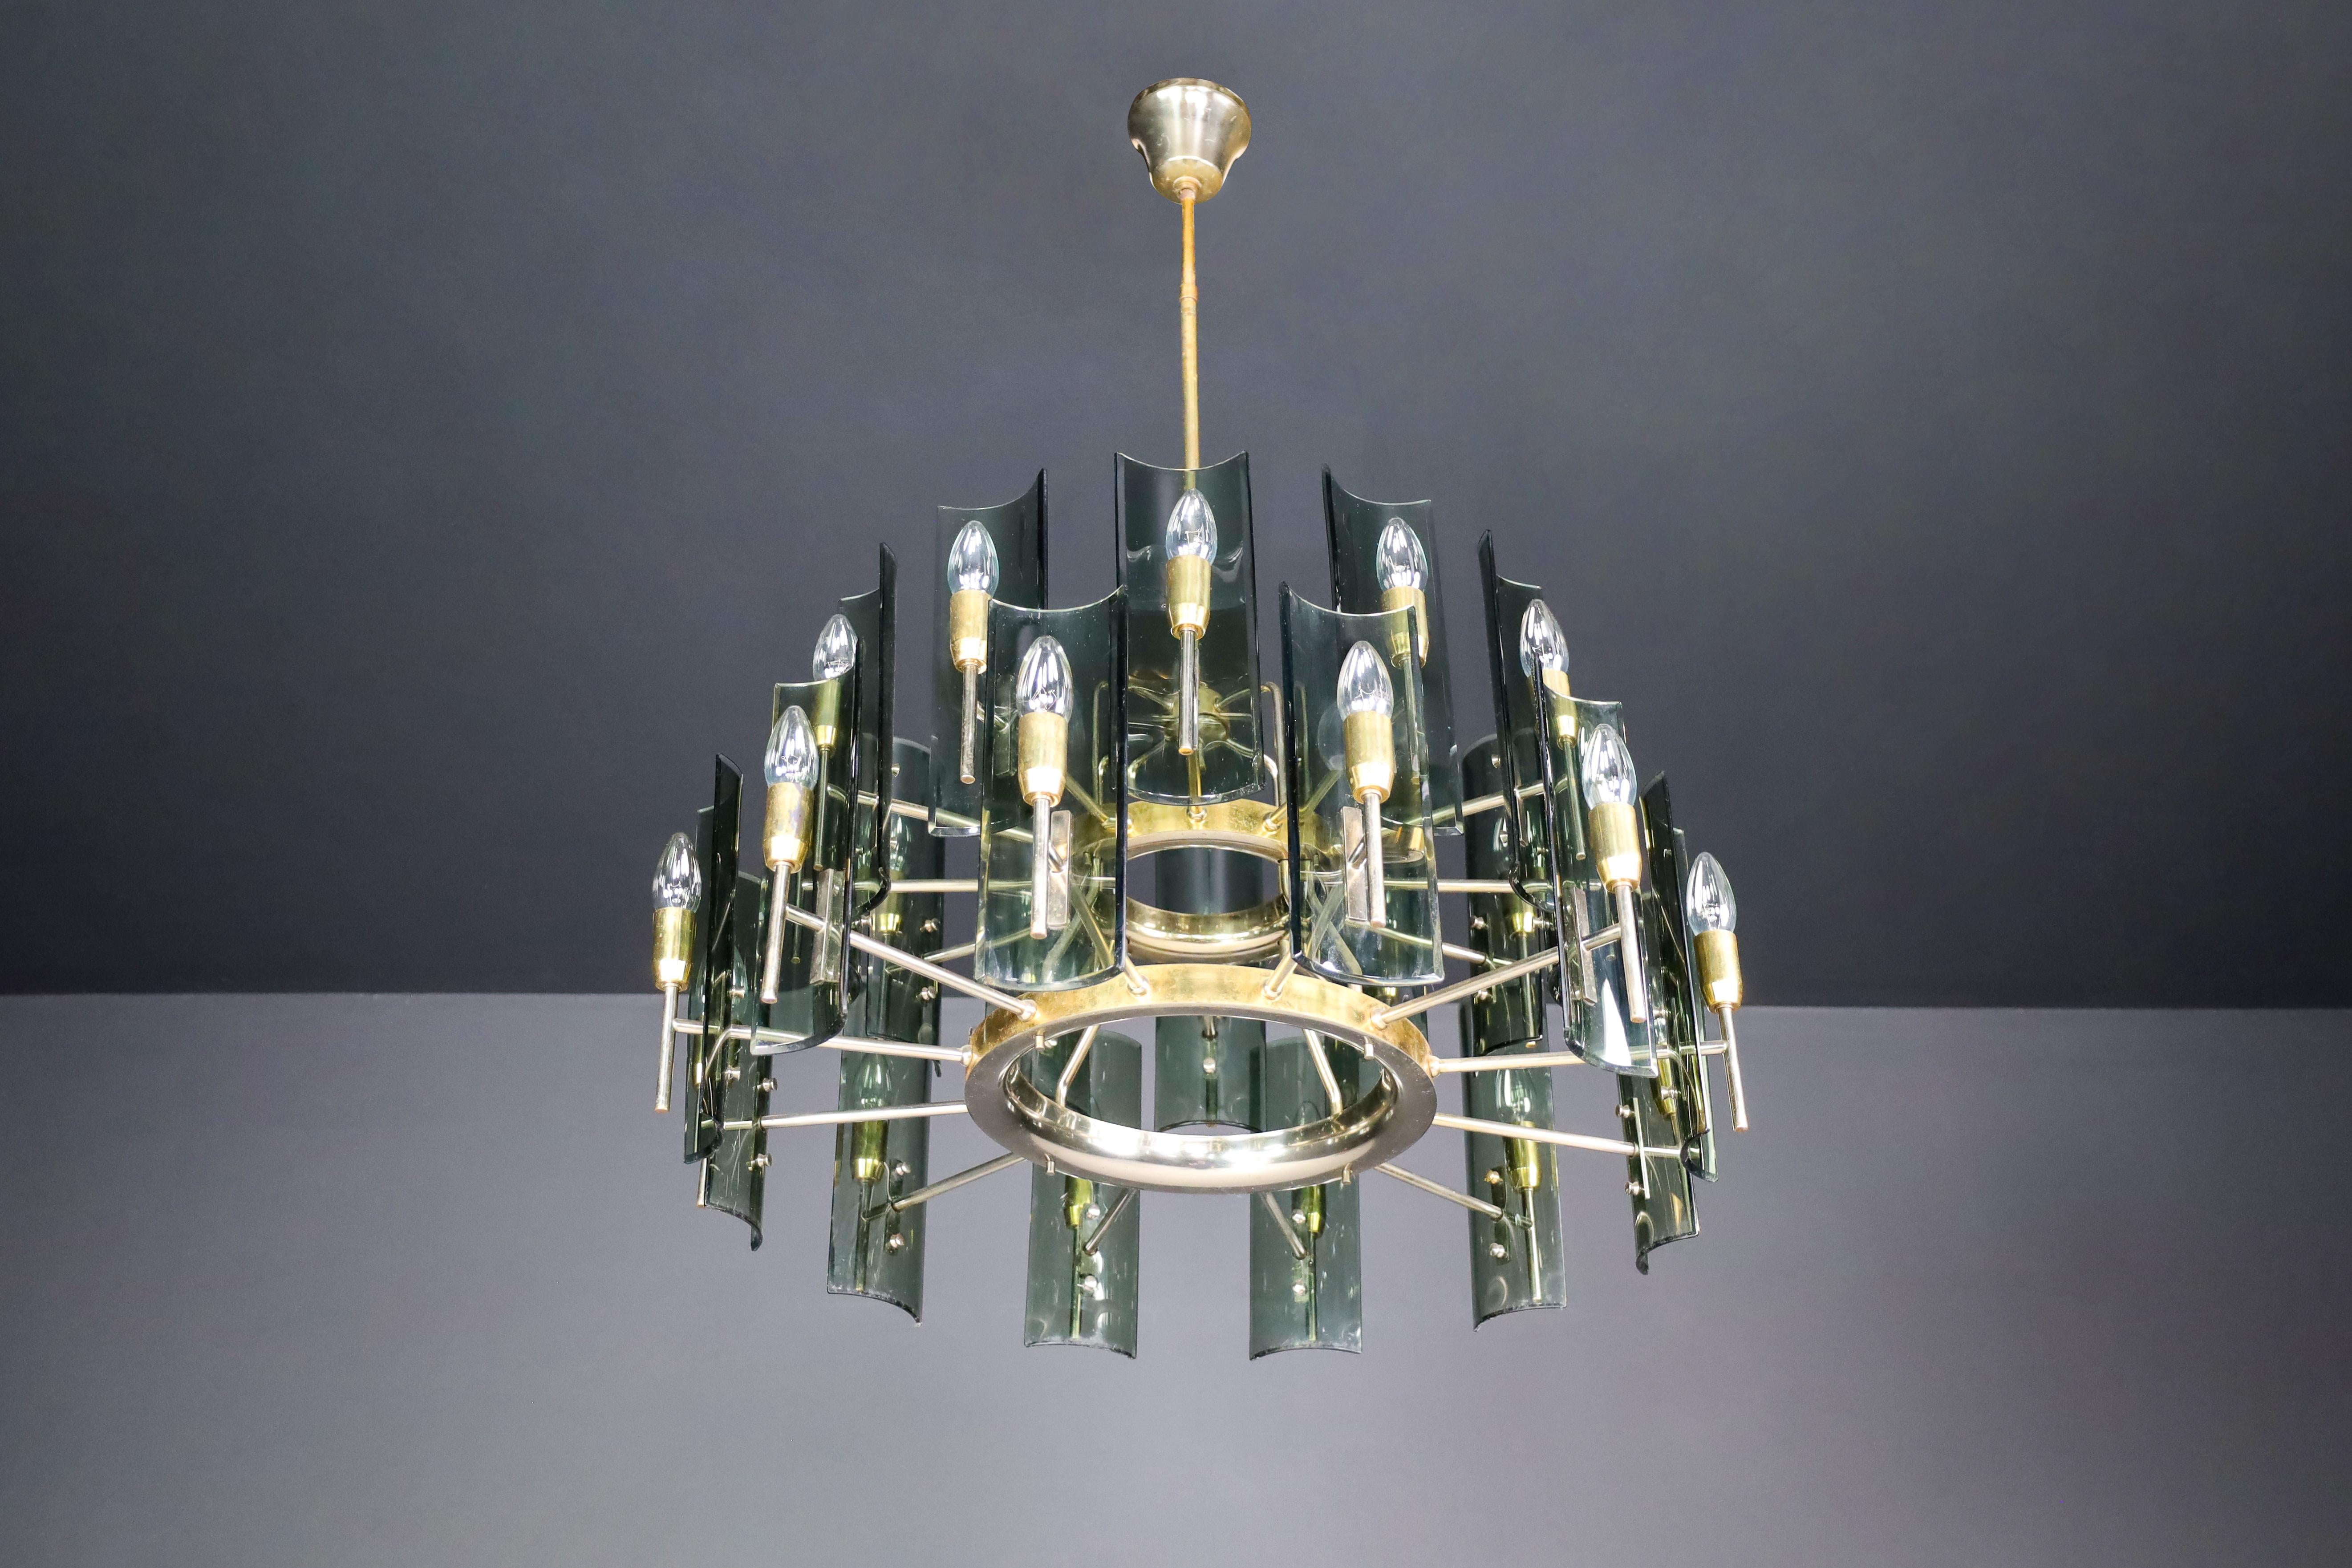 Set of Six Gino Paroldo Grande Chandeliers in Brass and Curved Glass, Italy 1950s

In the 1950s, Italian designer Gino Paroldo created a set of six grande chandeliers made of brass and glass. These chandeliers are an excellent representation of